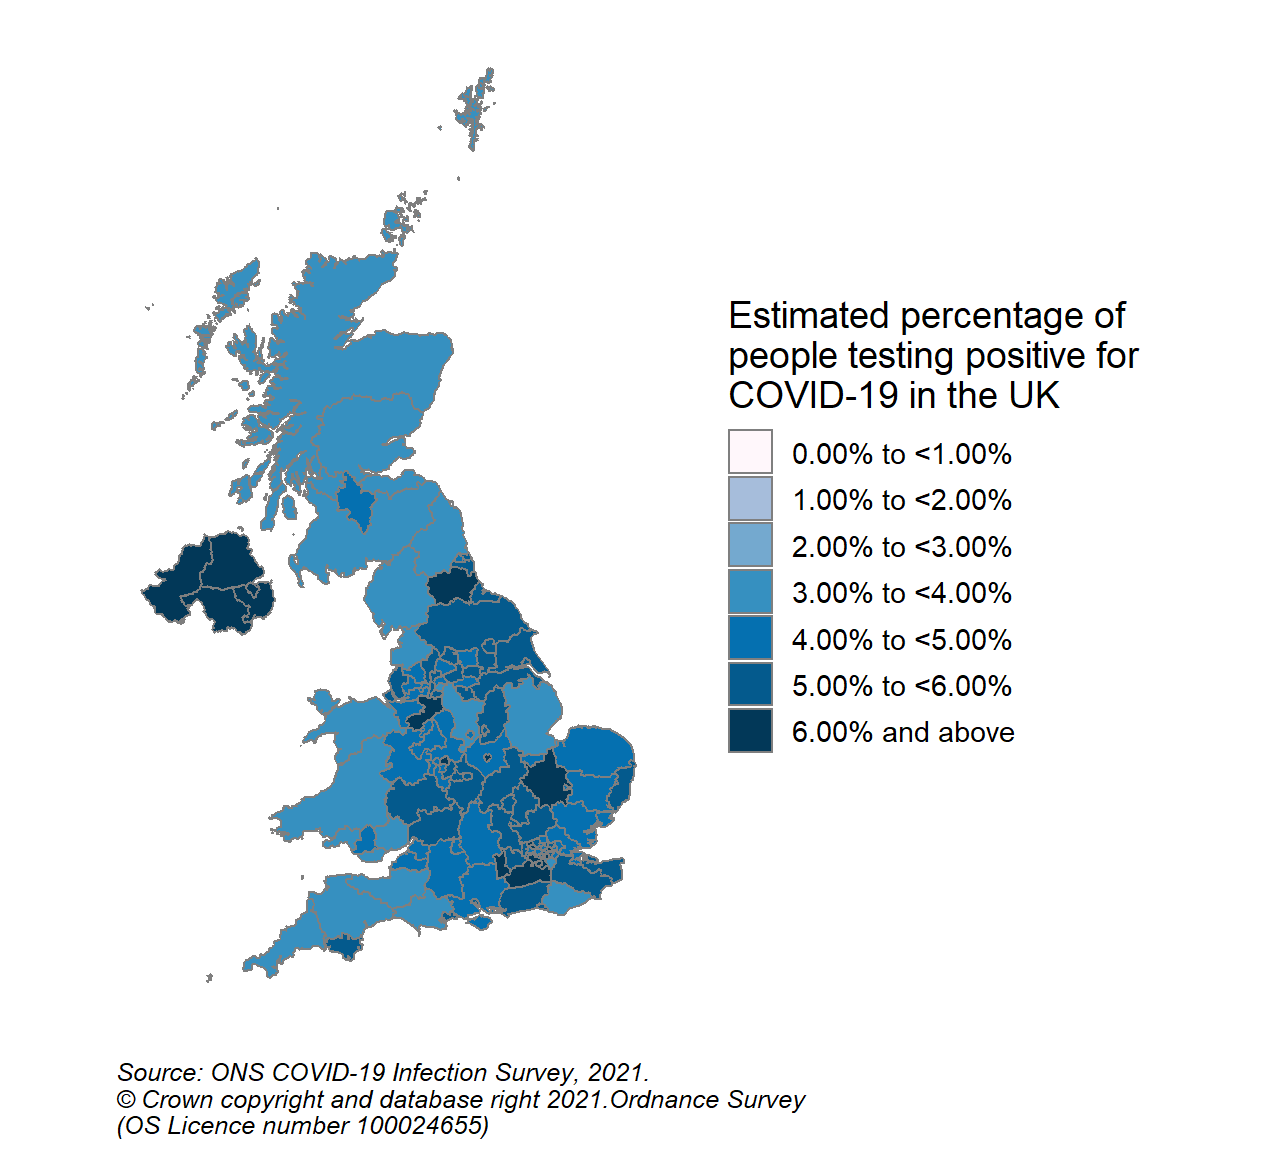 This colour coded map of the UK shows the modelled estimates of the percentage of the private residential population testing positive for COVID-19, by COVID-19 Infection Survey sub-regions. In Scotland, these sub-regions are comprised of Health Boards. The regions are: 123 - NHS Grampian, NHS Highland, NHS Orkney, NHS Shetland and NHS Western Isles, 124 - NHS Fife, NHS Forth Valley and NHS Tayside, 125 - NHS Greater Glasgow & Clyde, 126 - NHS Lothian, 127 - NHS Lanarkshire, 128 - NHS Ayrshire & Arran, NHS Borders and NHS Dumfries & Galloway.  The sub-region with the highest modelled estimate for the percentage of people testing positive was CIS Region 127 (NHS Lanarkshire) at 4.46% (95% credible interval: 3.66% to 5.35%).  The sub-region with the lowest modelled estimate was Region 123 (NHS Grampian, NHS Highland, NHS Orkney, NHS Shetland and NHS Western Isles), at 3.21% (95% credible interval: 2.65% to 3.94%).